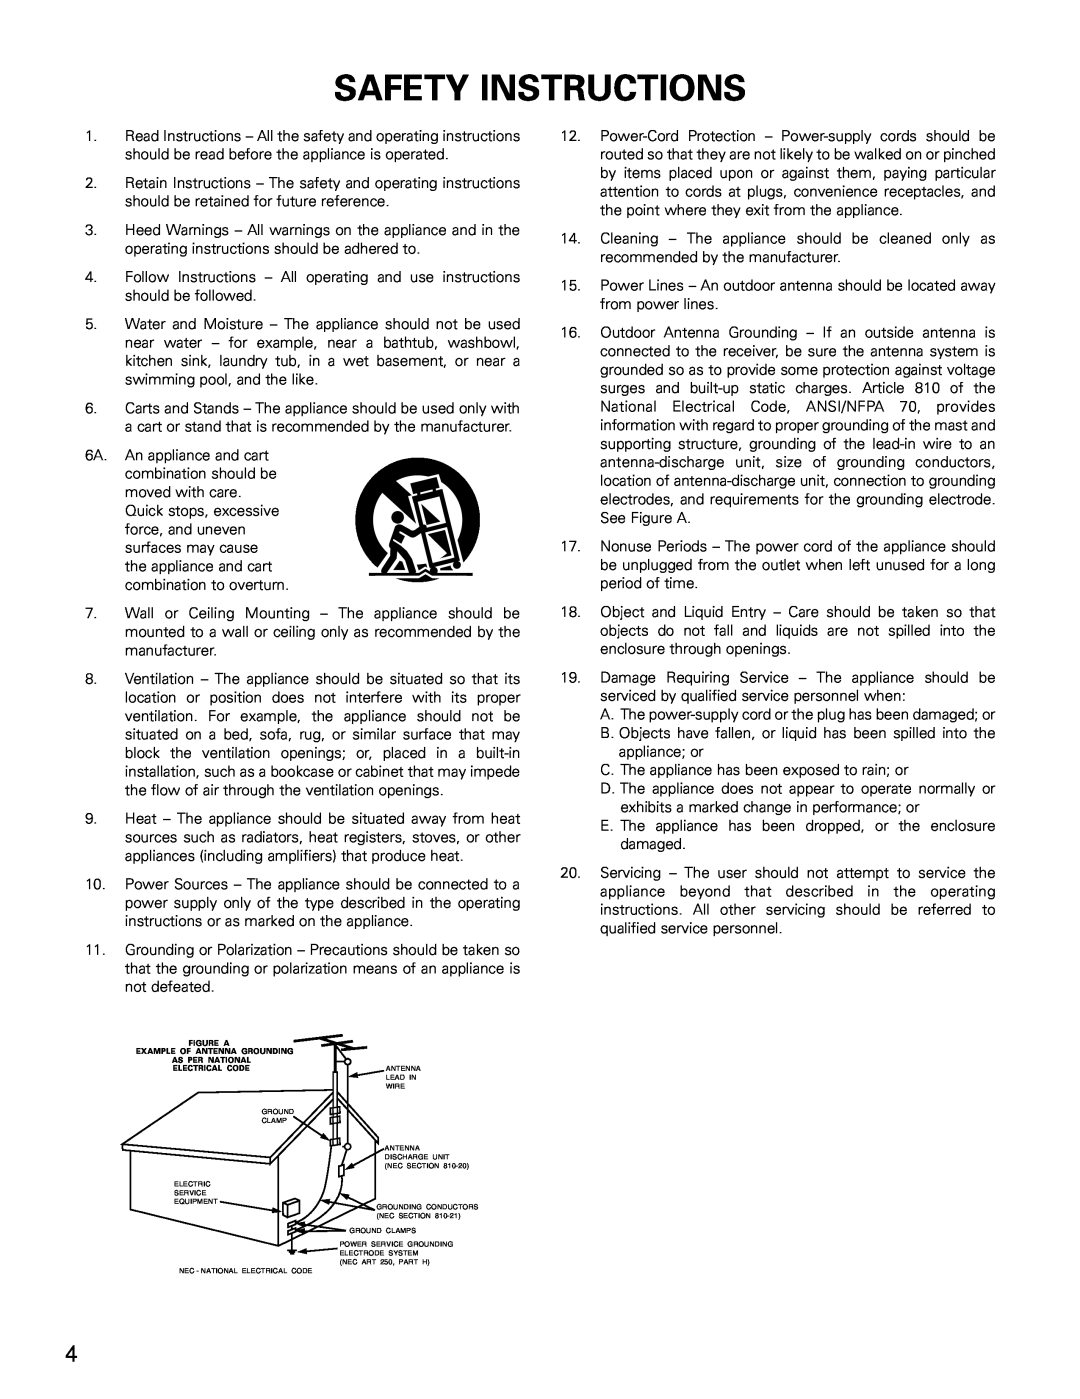 Denon DVD-1000 manual Safety Instructions 